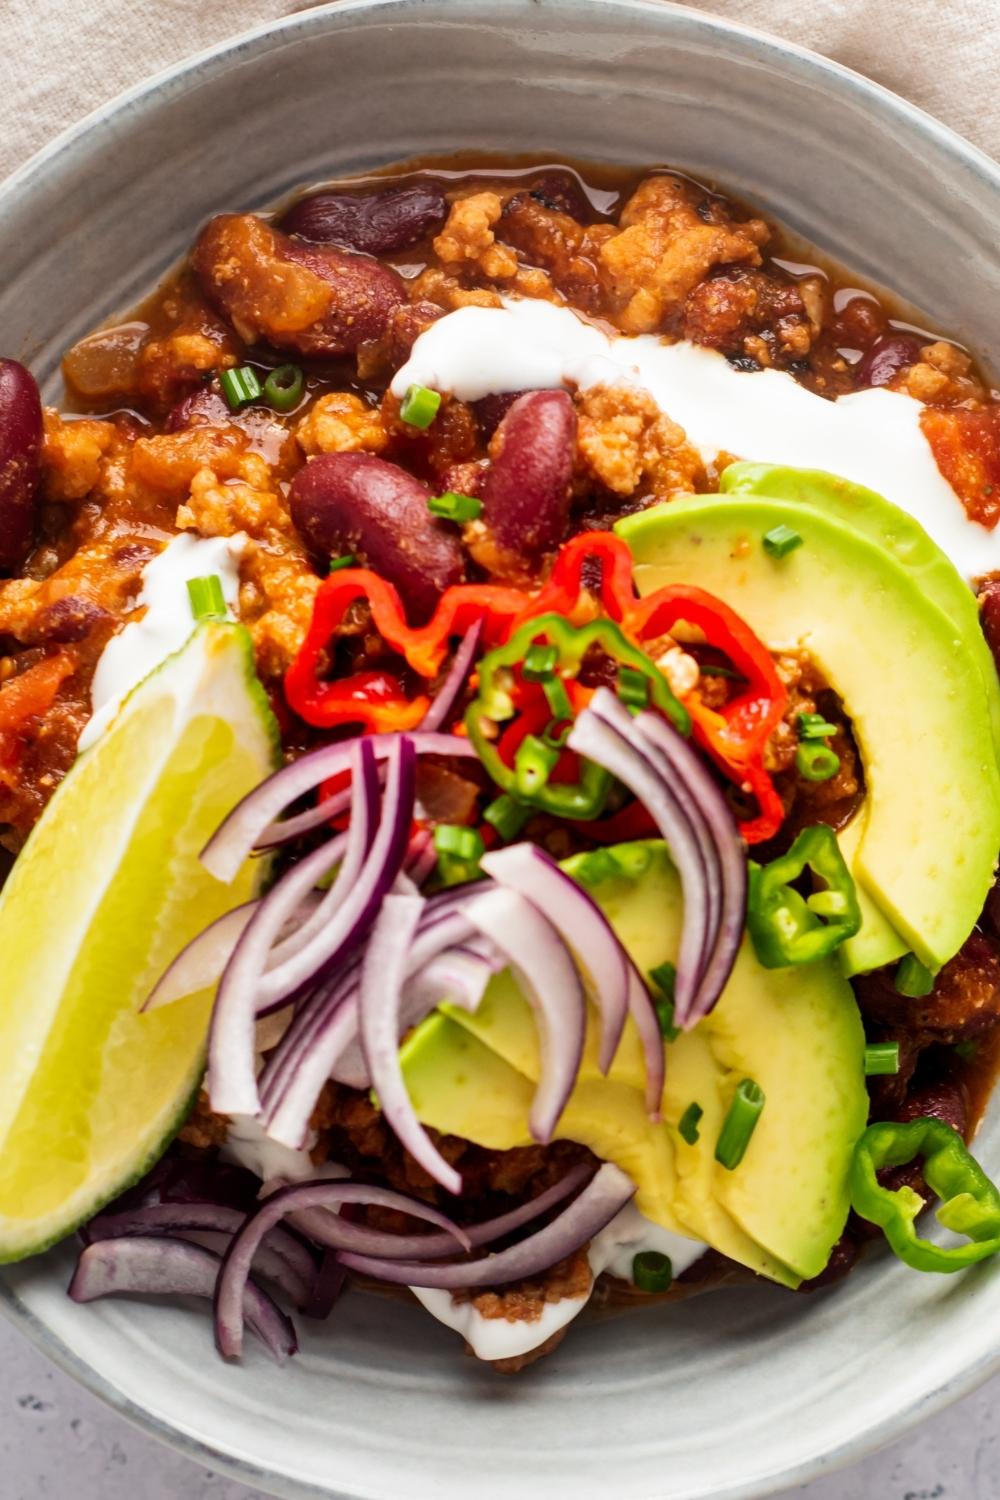 Avocado and red onion on top of a bowl of Texas chili.